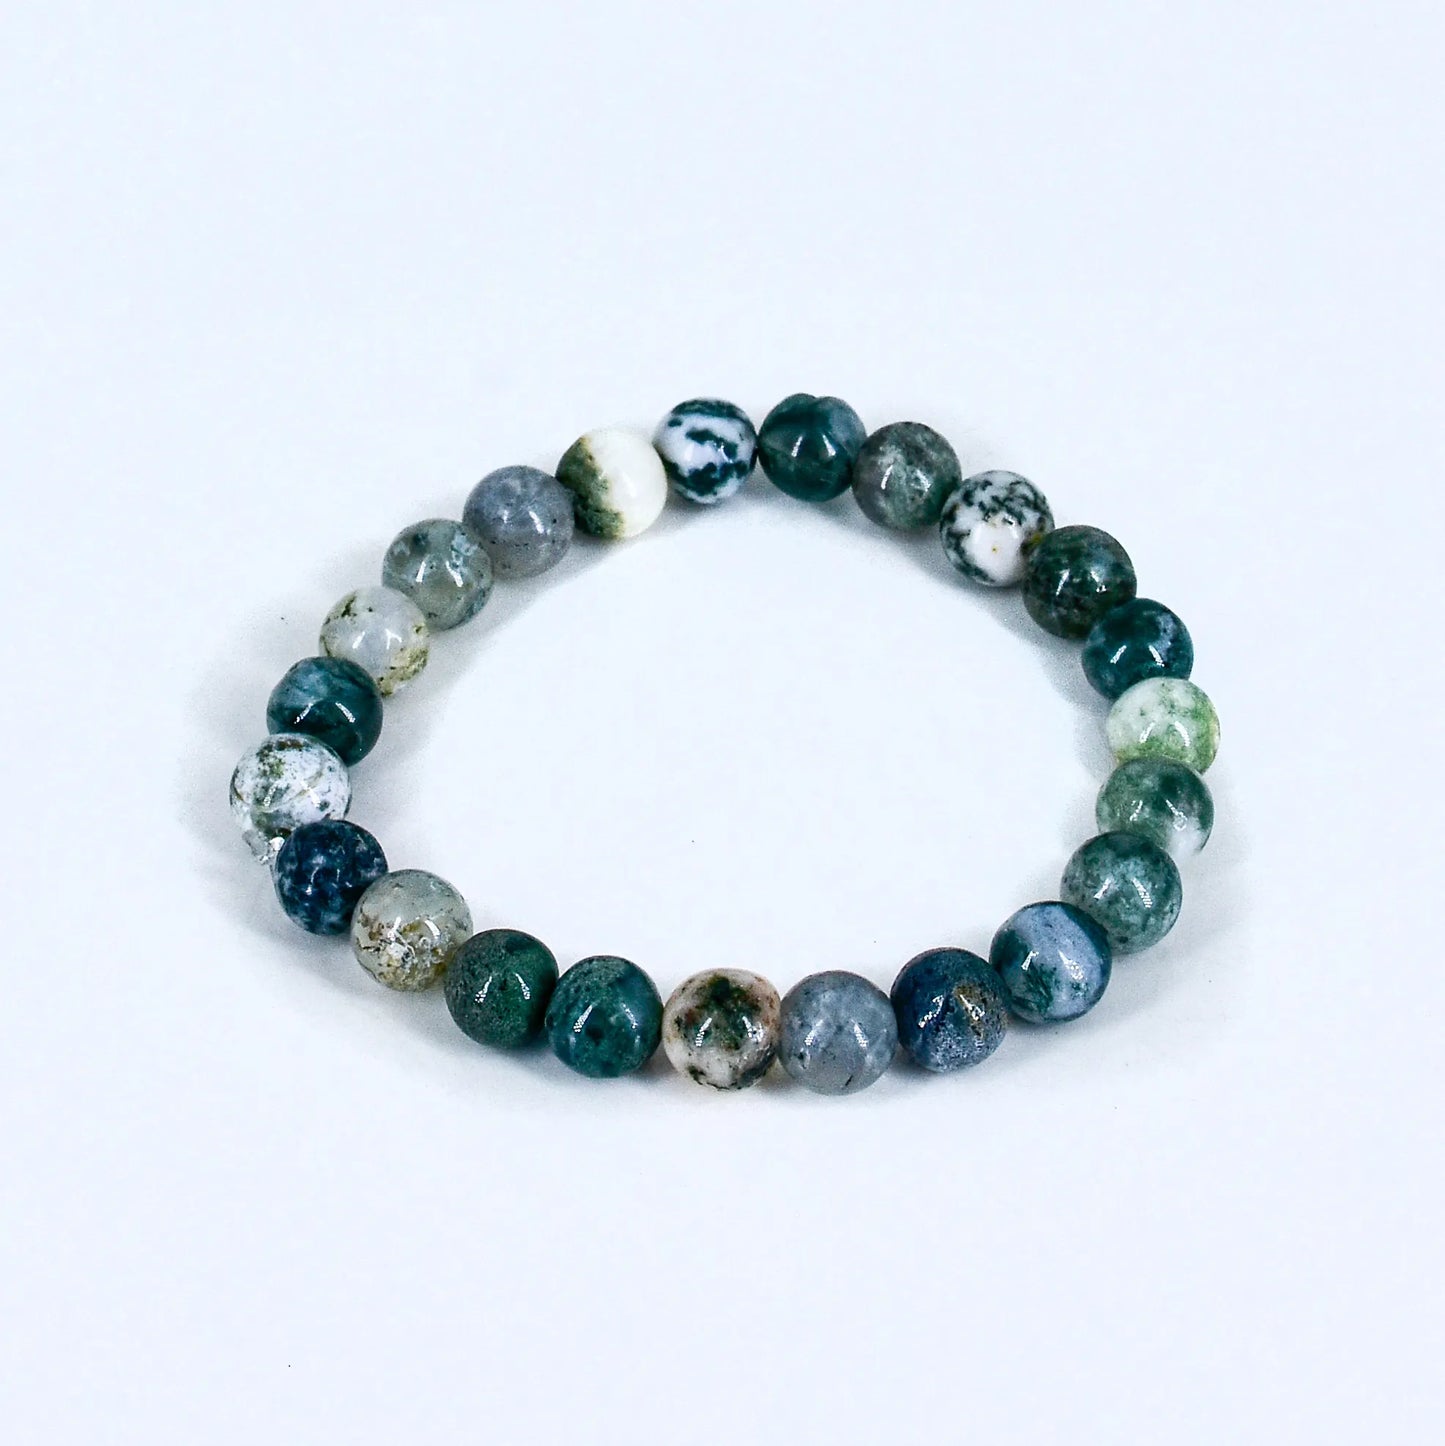 Tree Agate Green Crystal Stone Bracelet for Peace